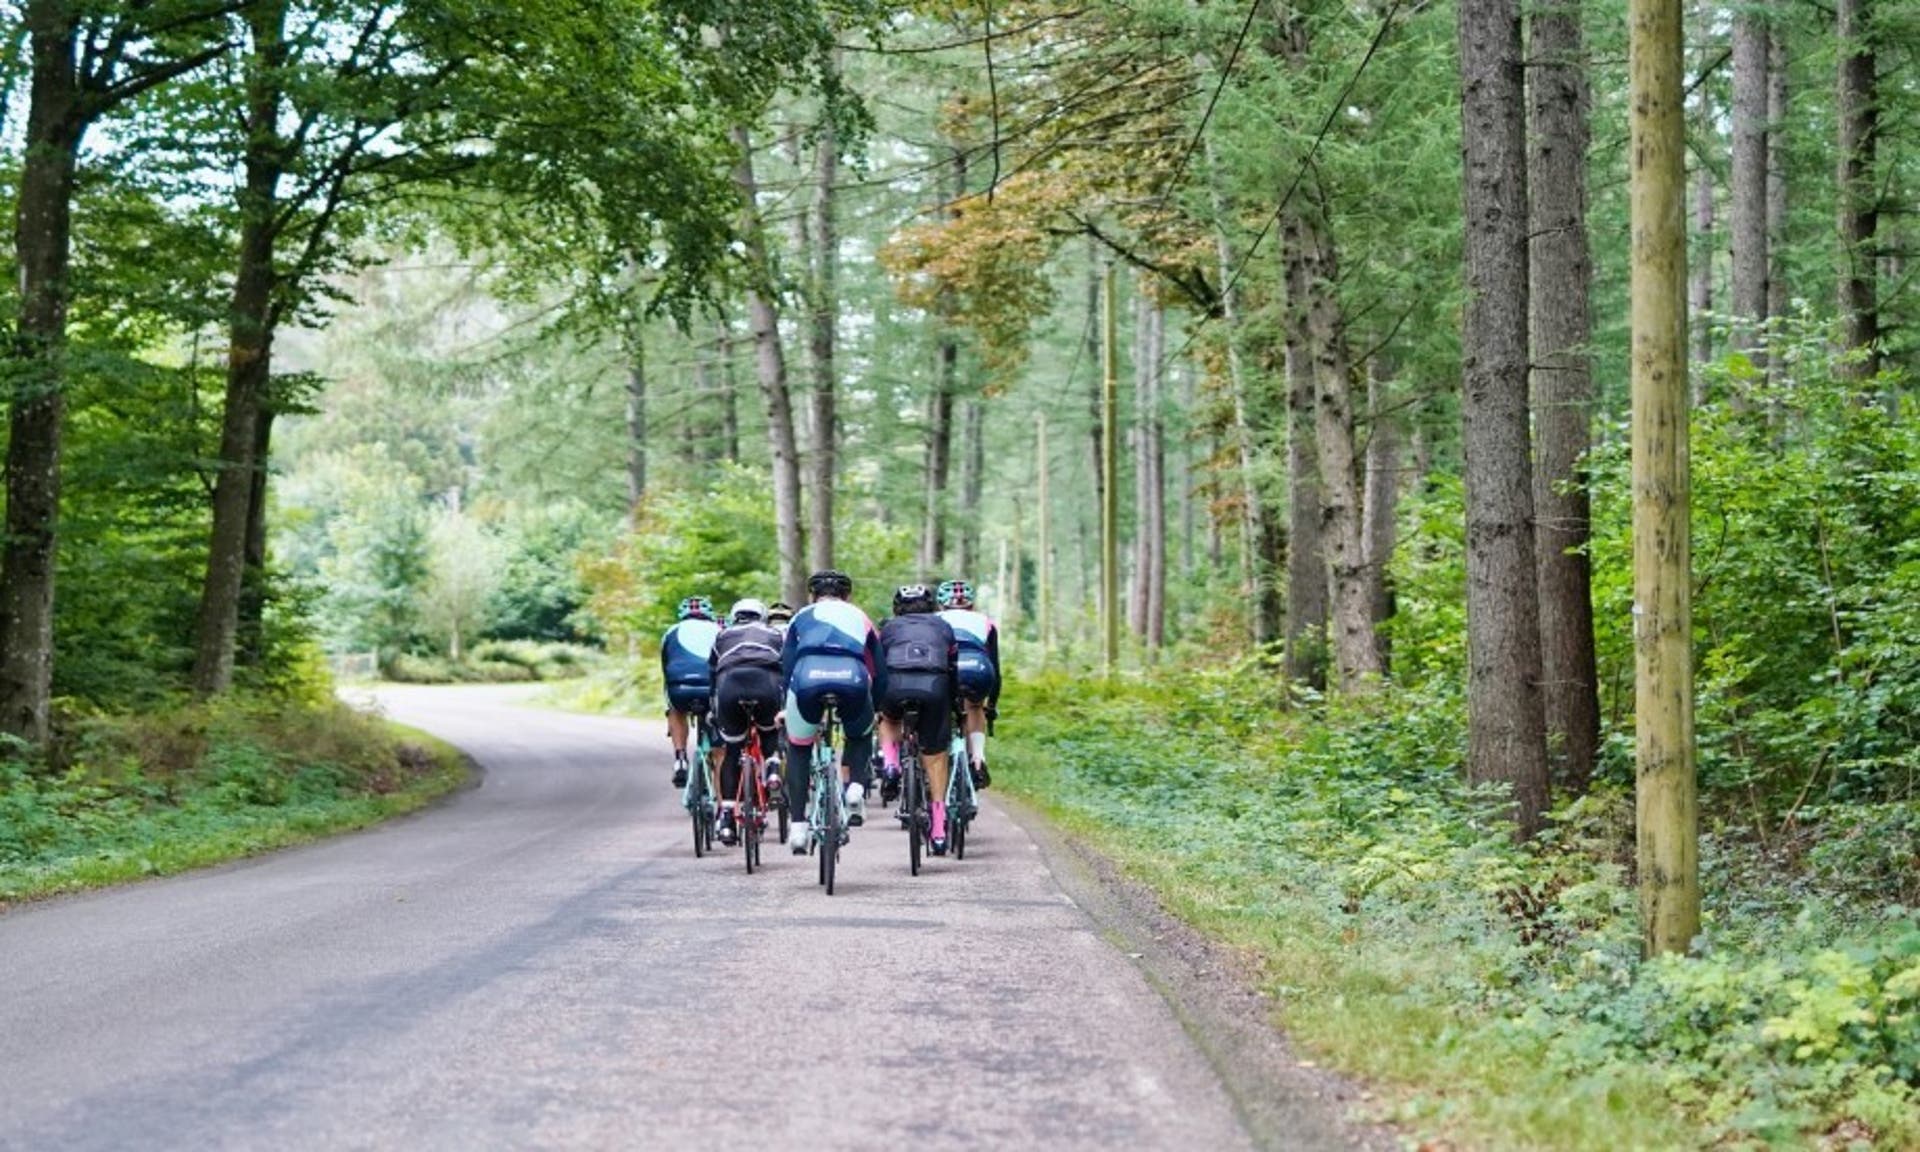  image of a peloton of cyclists from behind, travelling down a country lane 